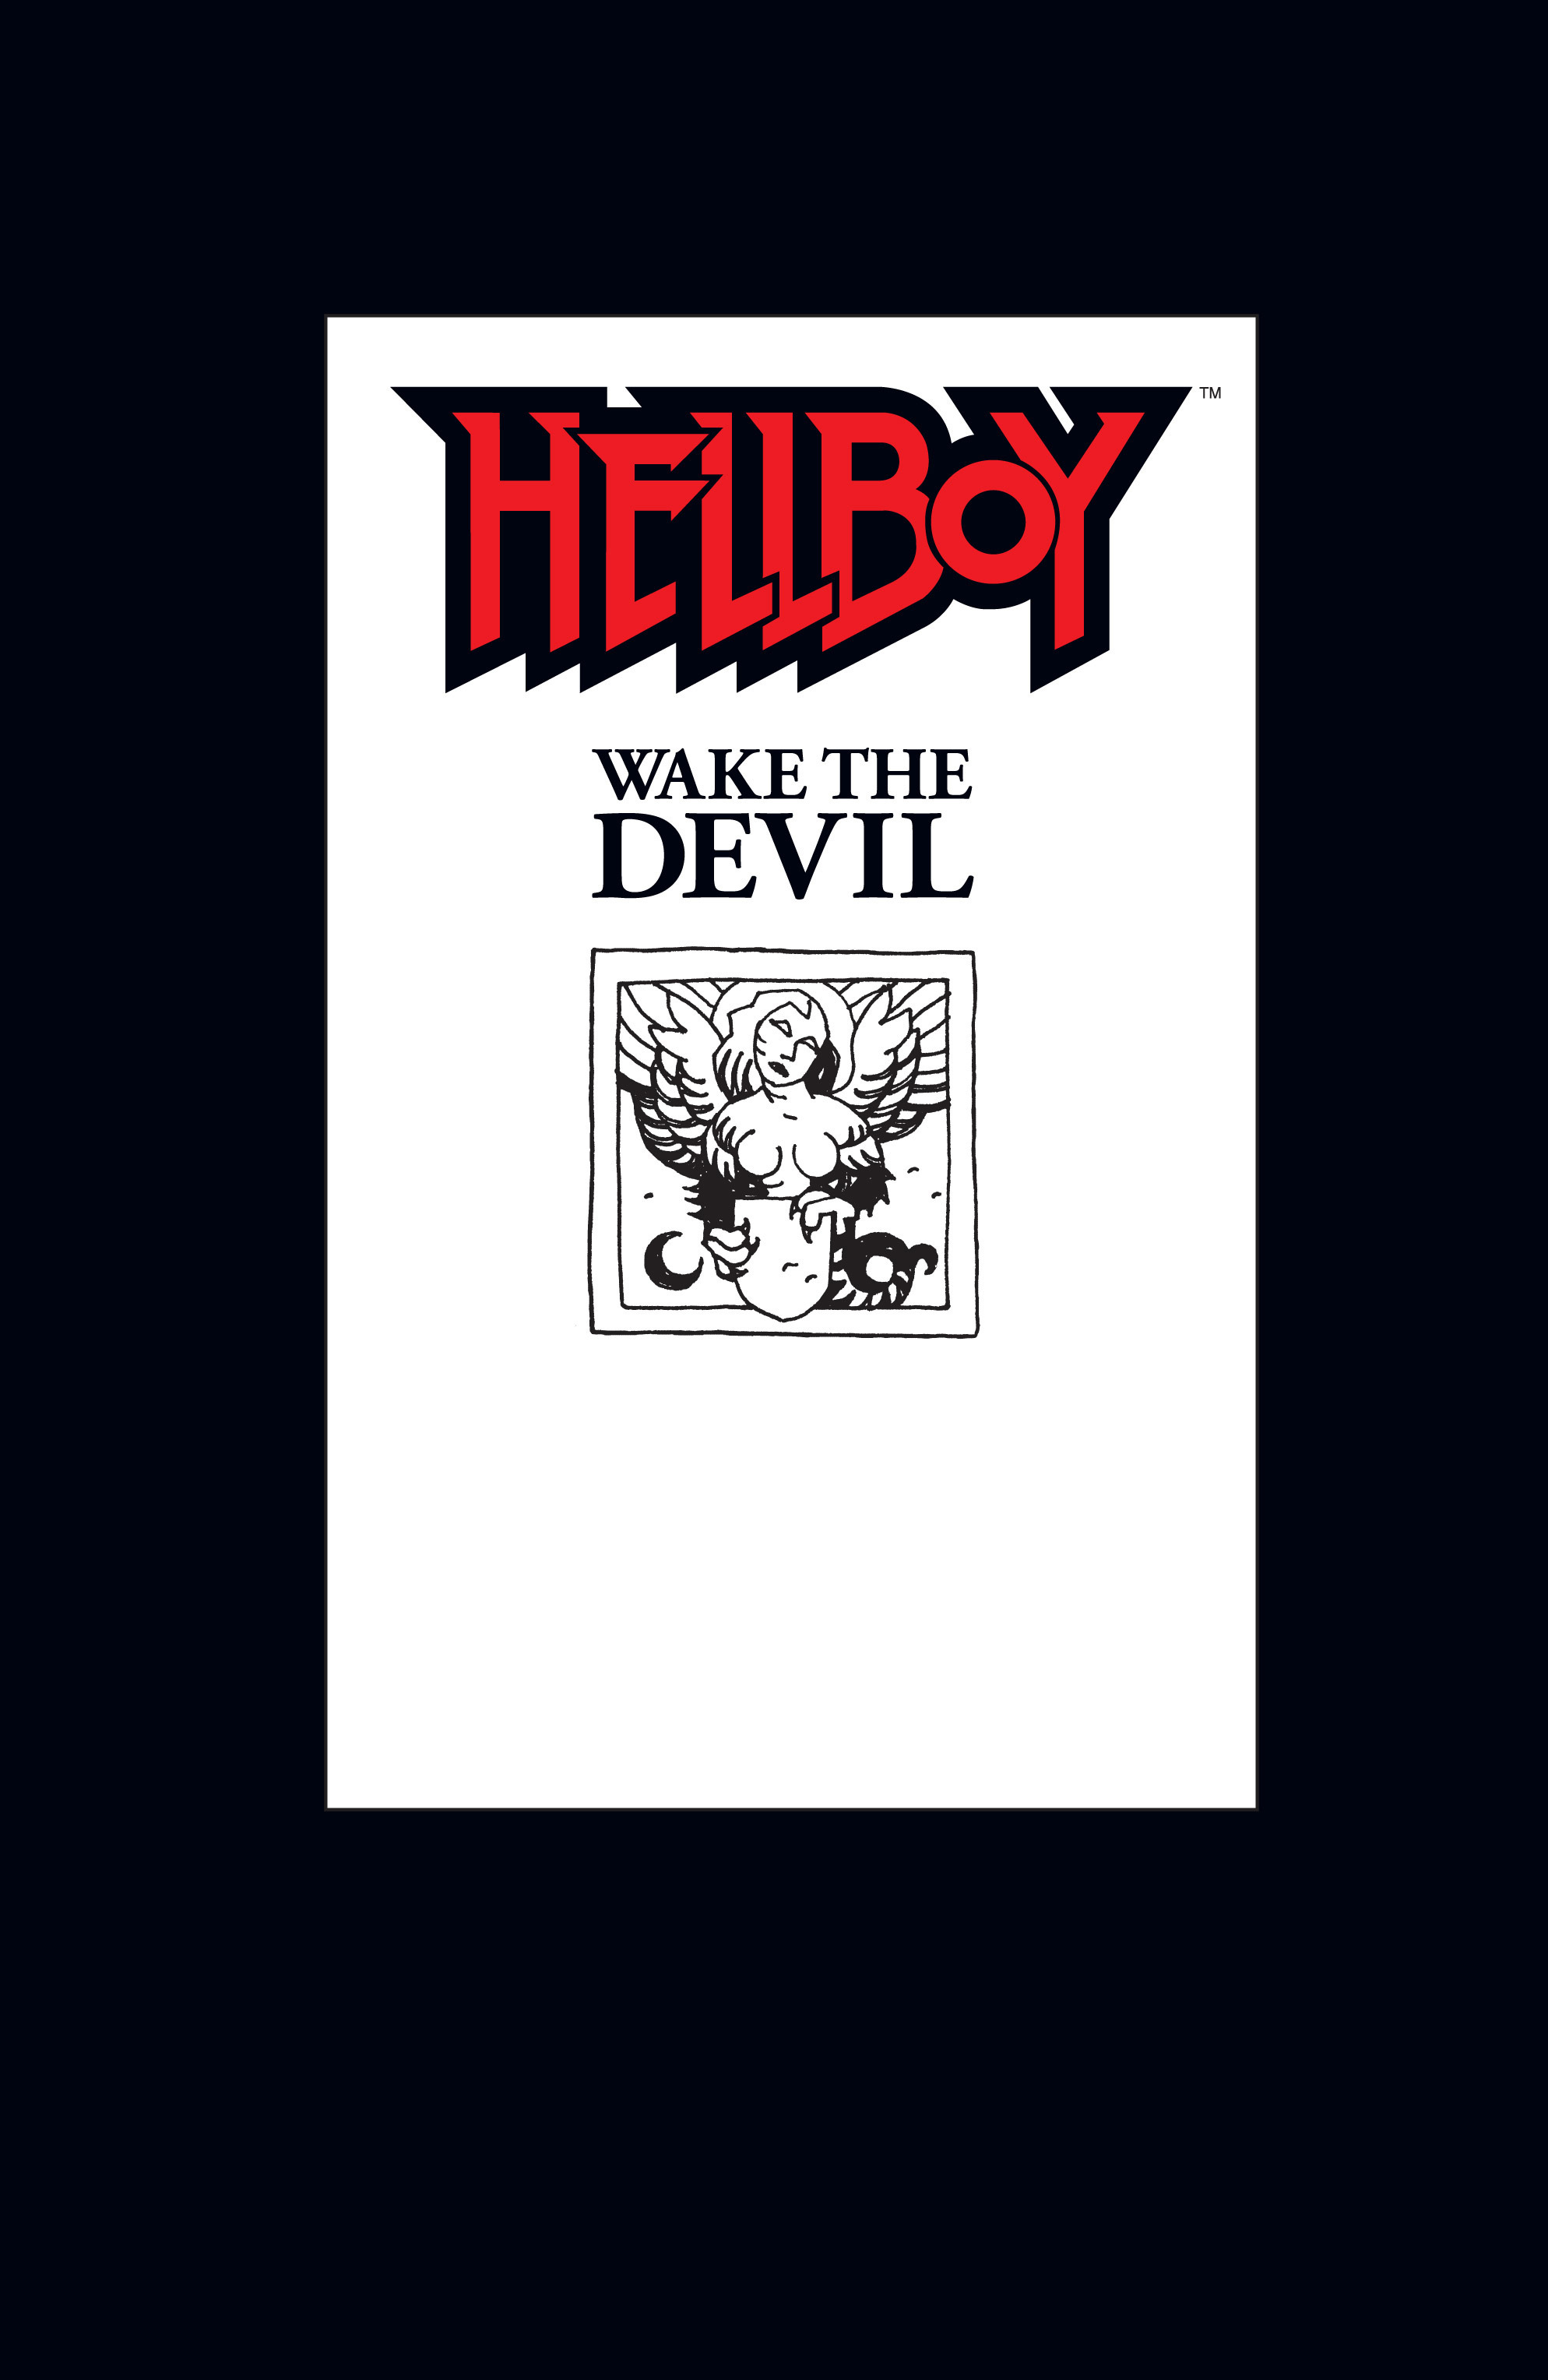 Read online Hellboy comic -  Issue #2 - 3